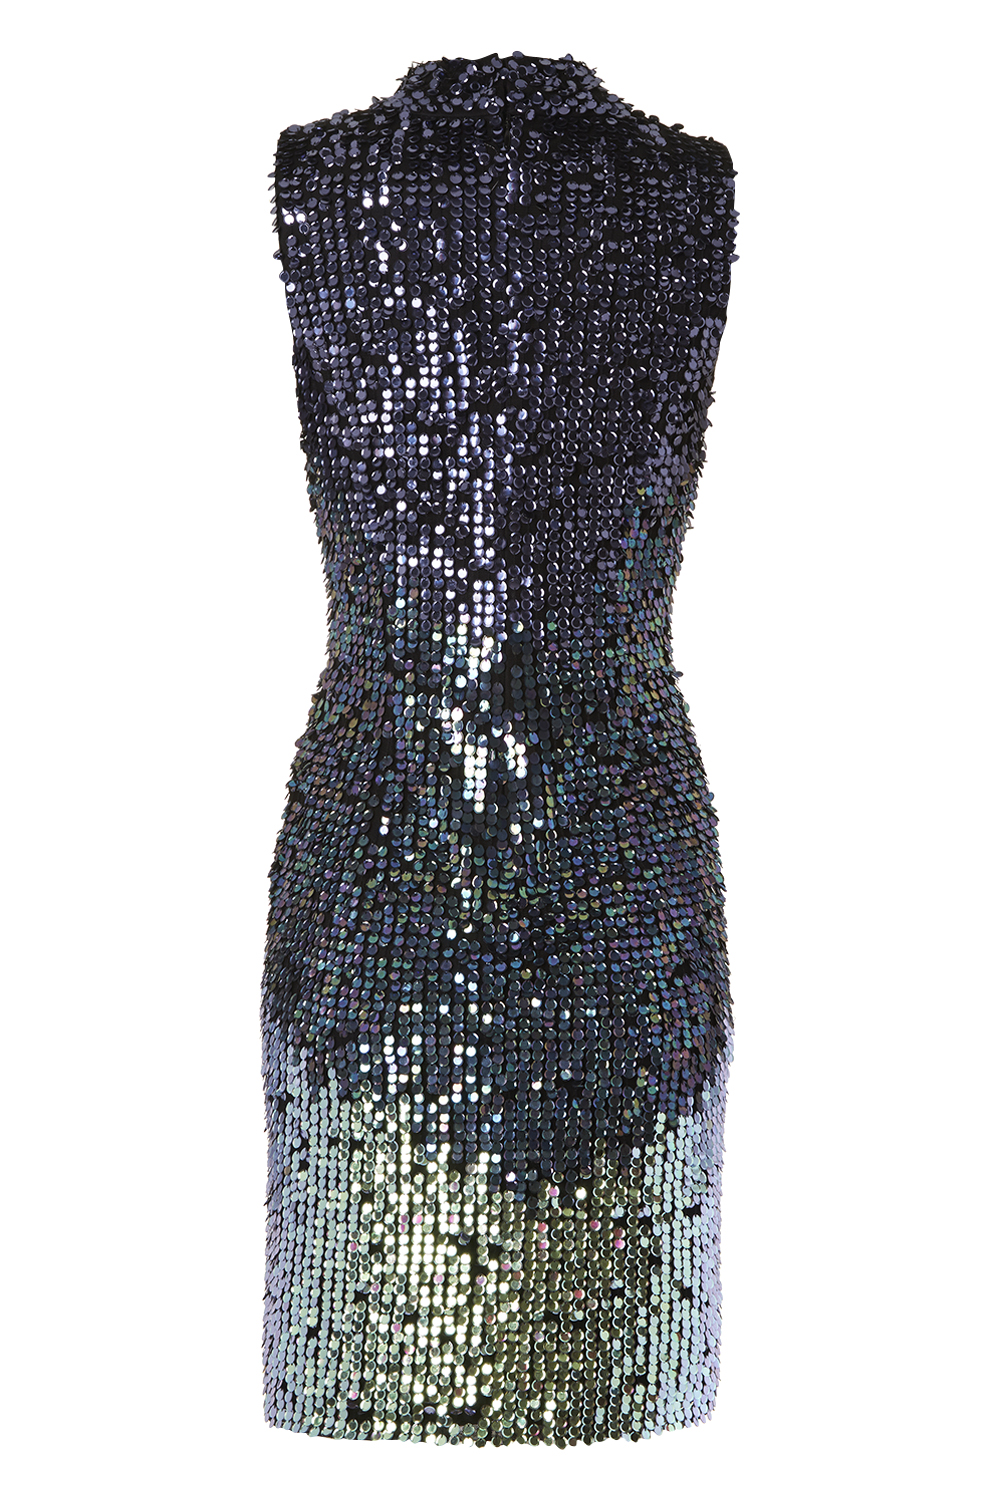 Navy  Stunning Ombre Sequin Dress, Image 7 of 8